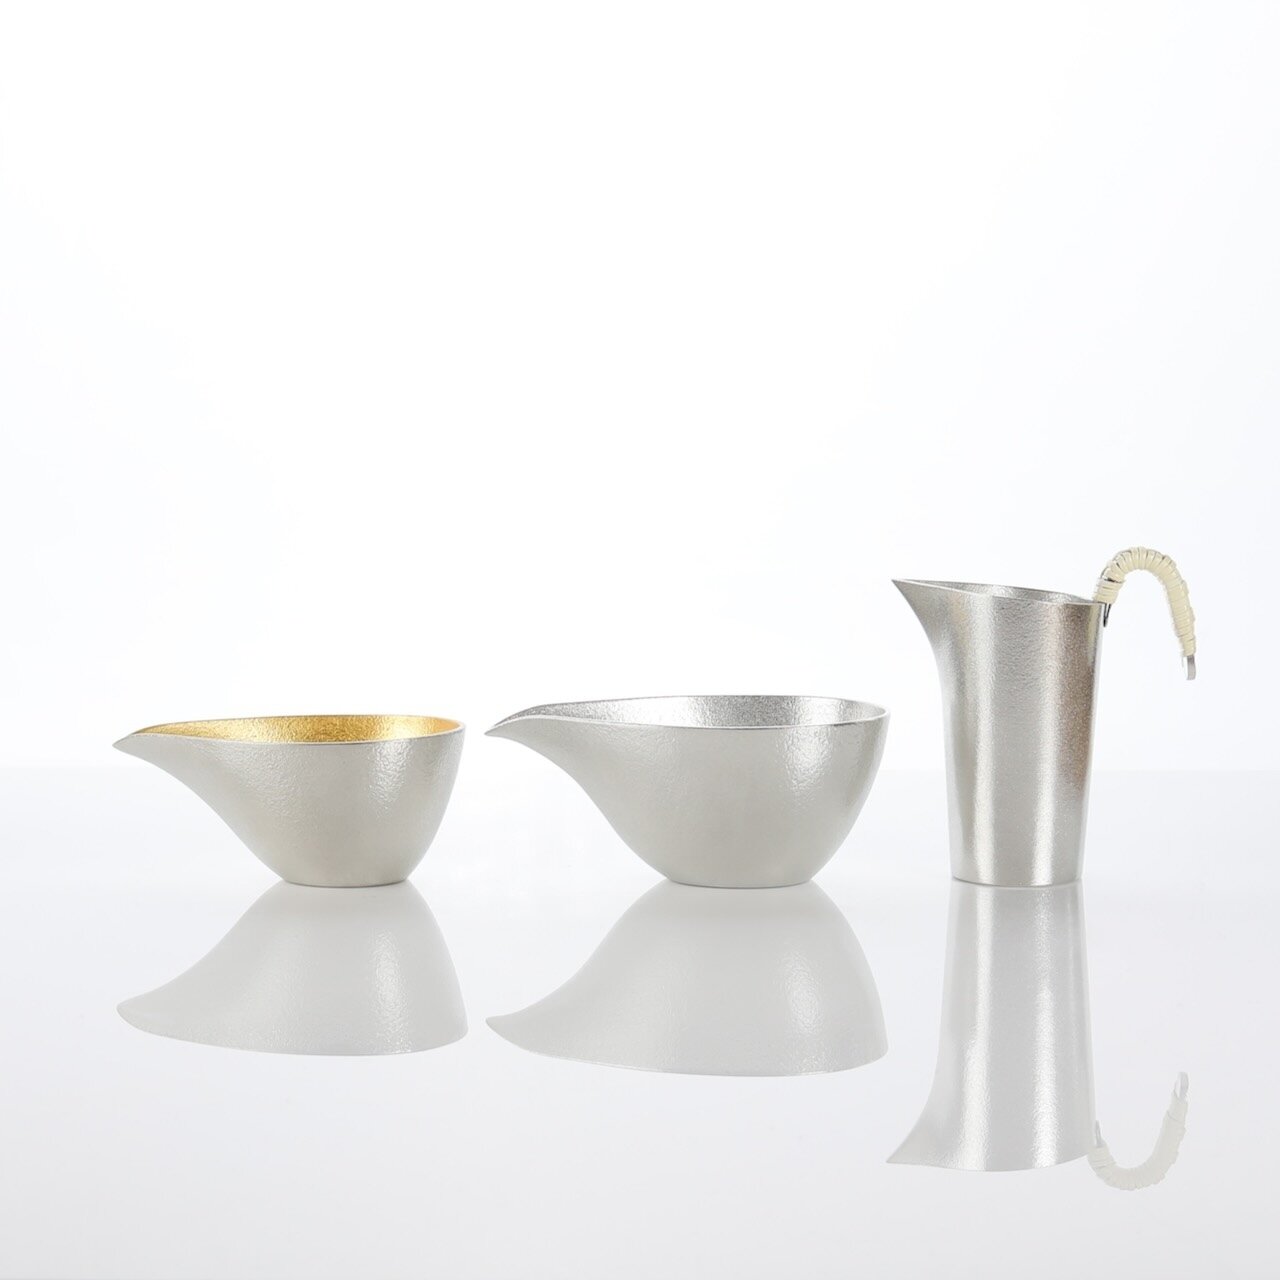 NEW NOUSAKU HAS ARRIVED!!⁠
&bull;⁠
&bull;⁠
The famous Japanese producer of some of the finest Tin sakeware is back in stock. ⁠
&bull;⁠
These cups and carafes are not only beautiful but also malleable and strong. A wonderful addition to any table; the